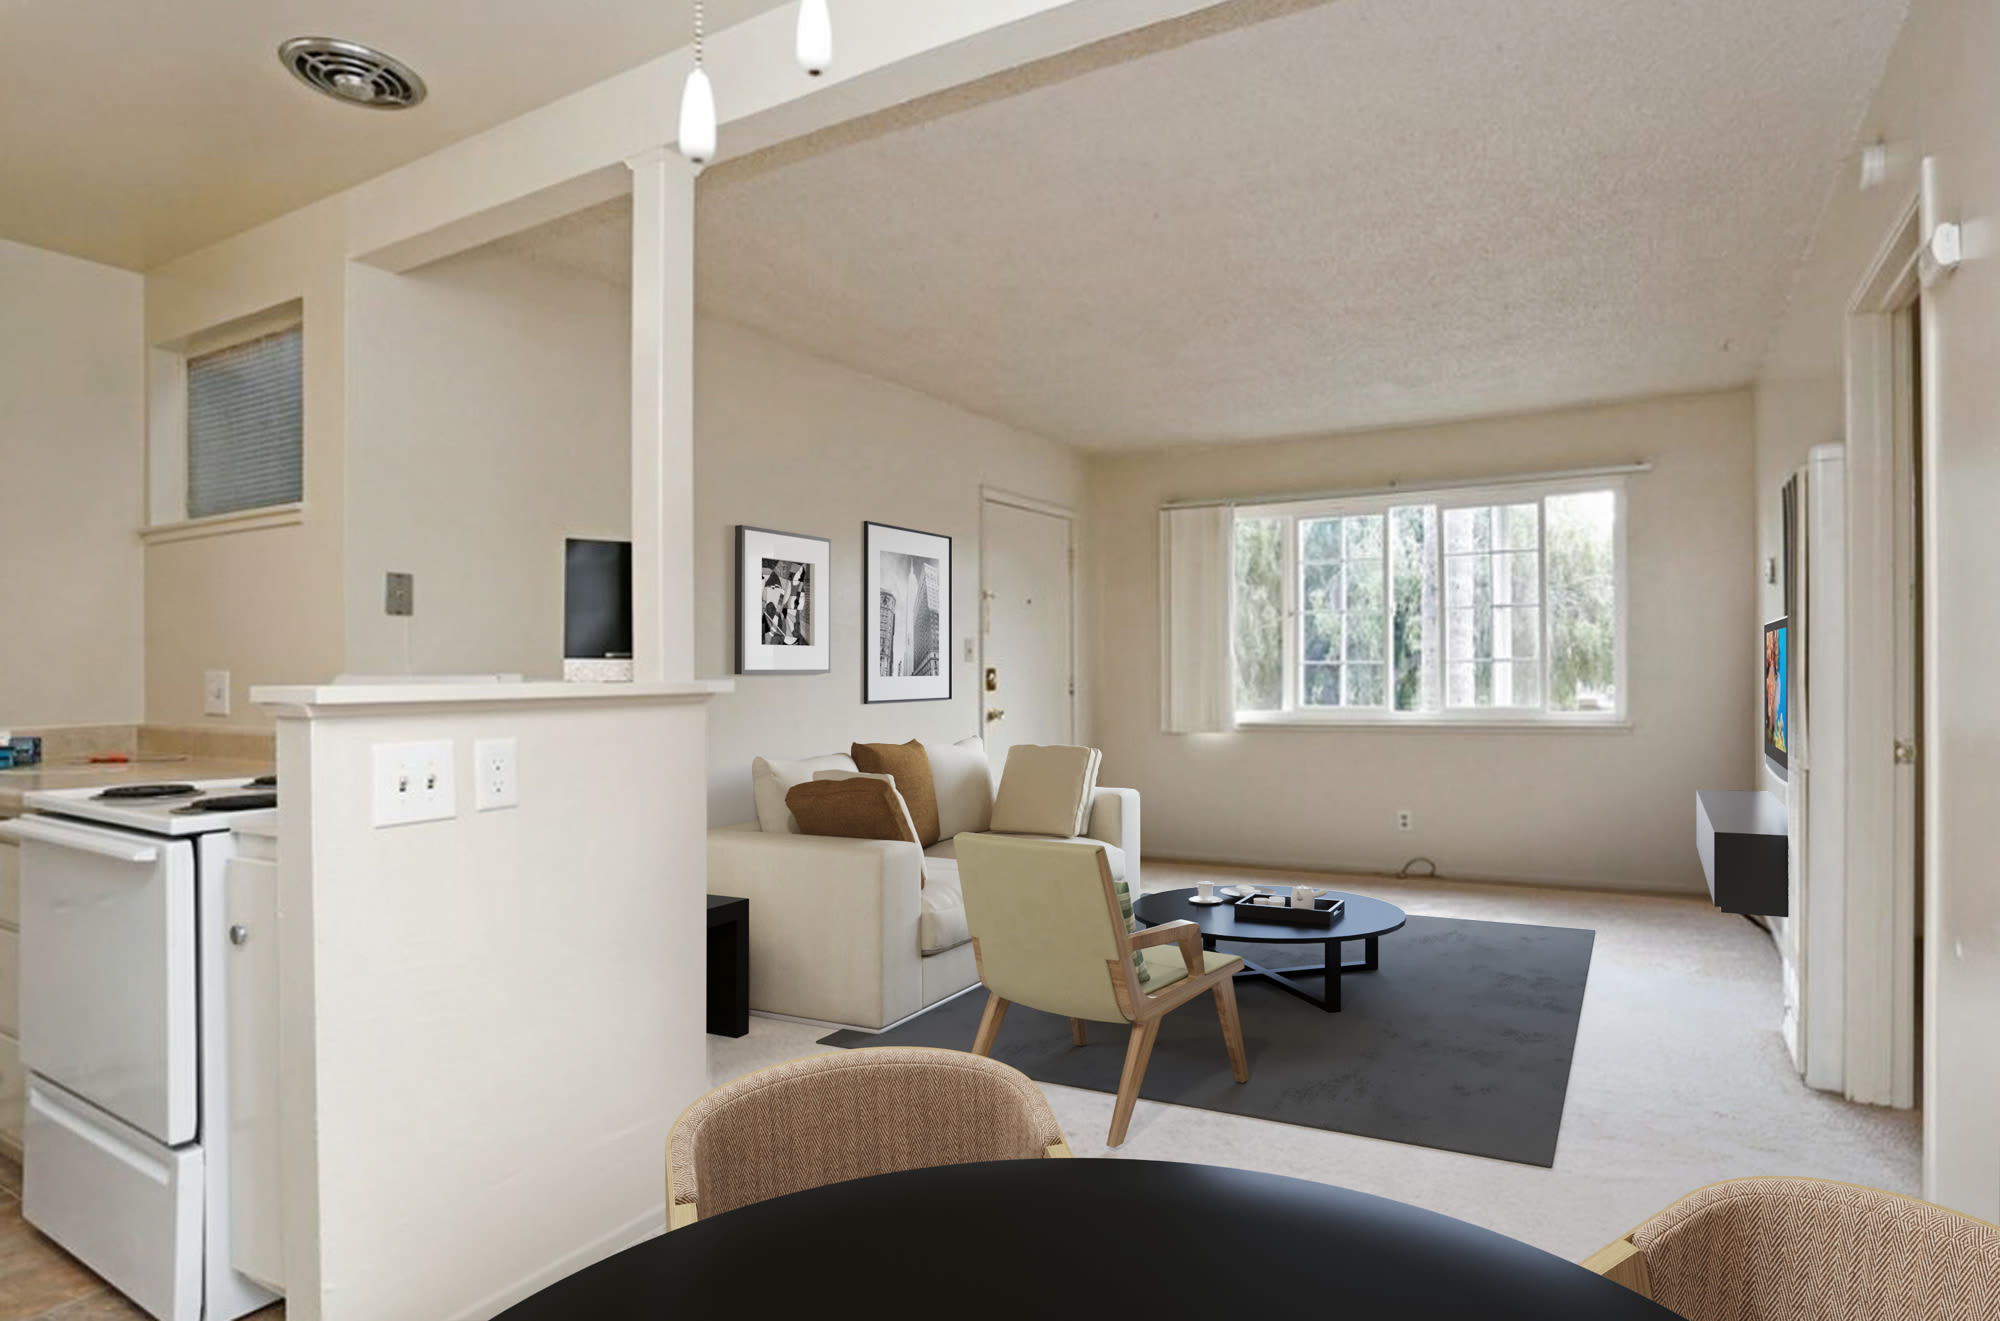 Spacious kitchen and living room at Coronado Apartments in Fremont, California